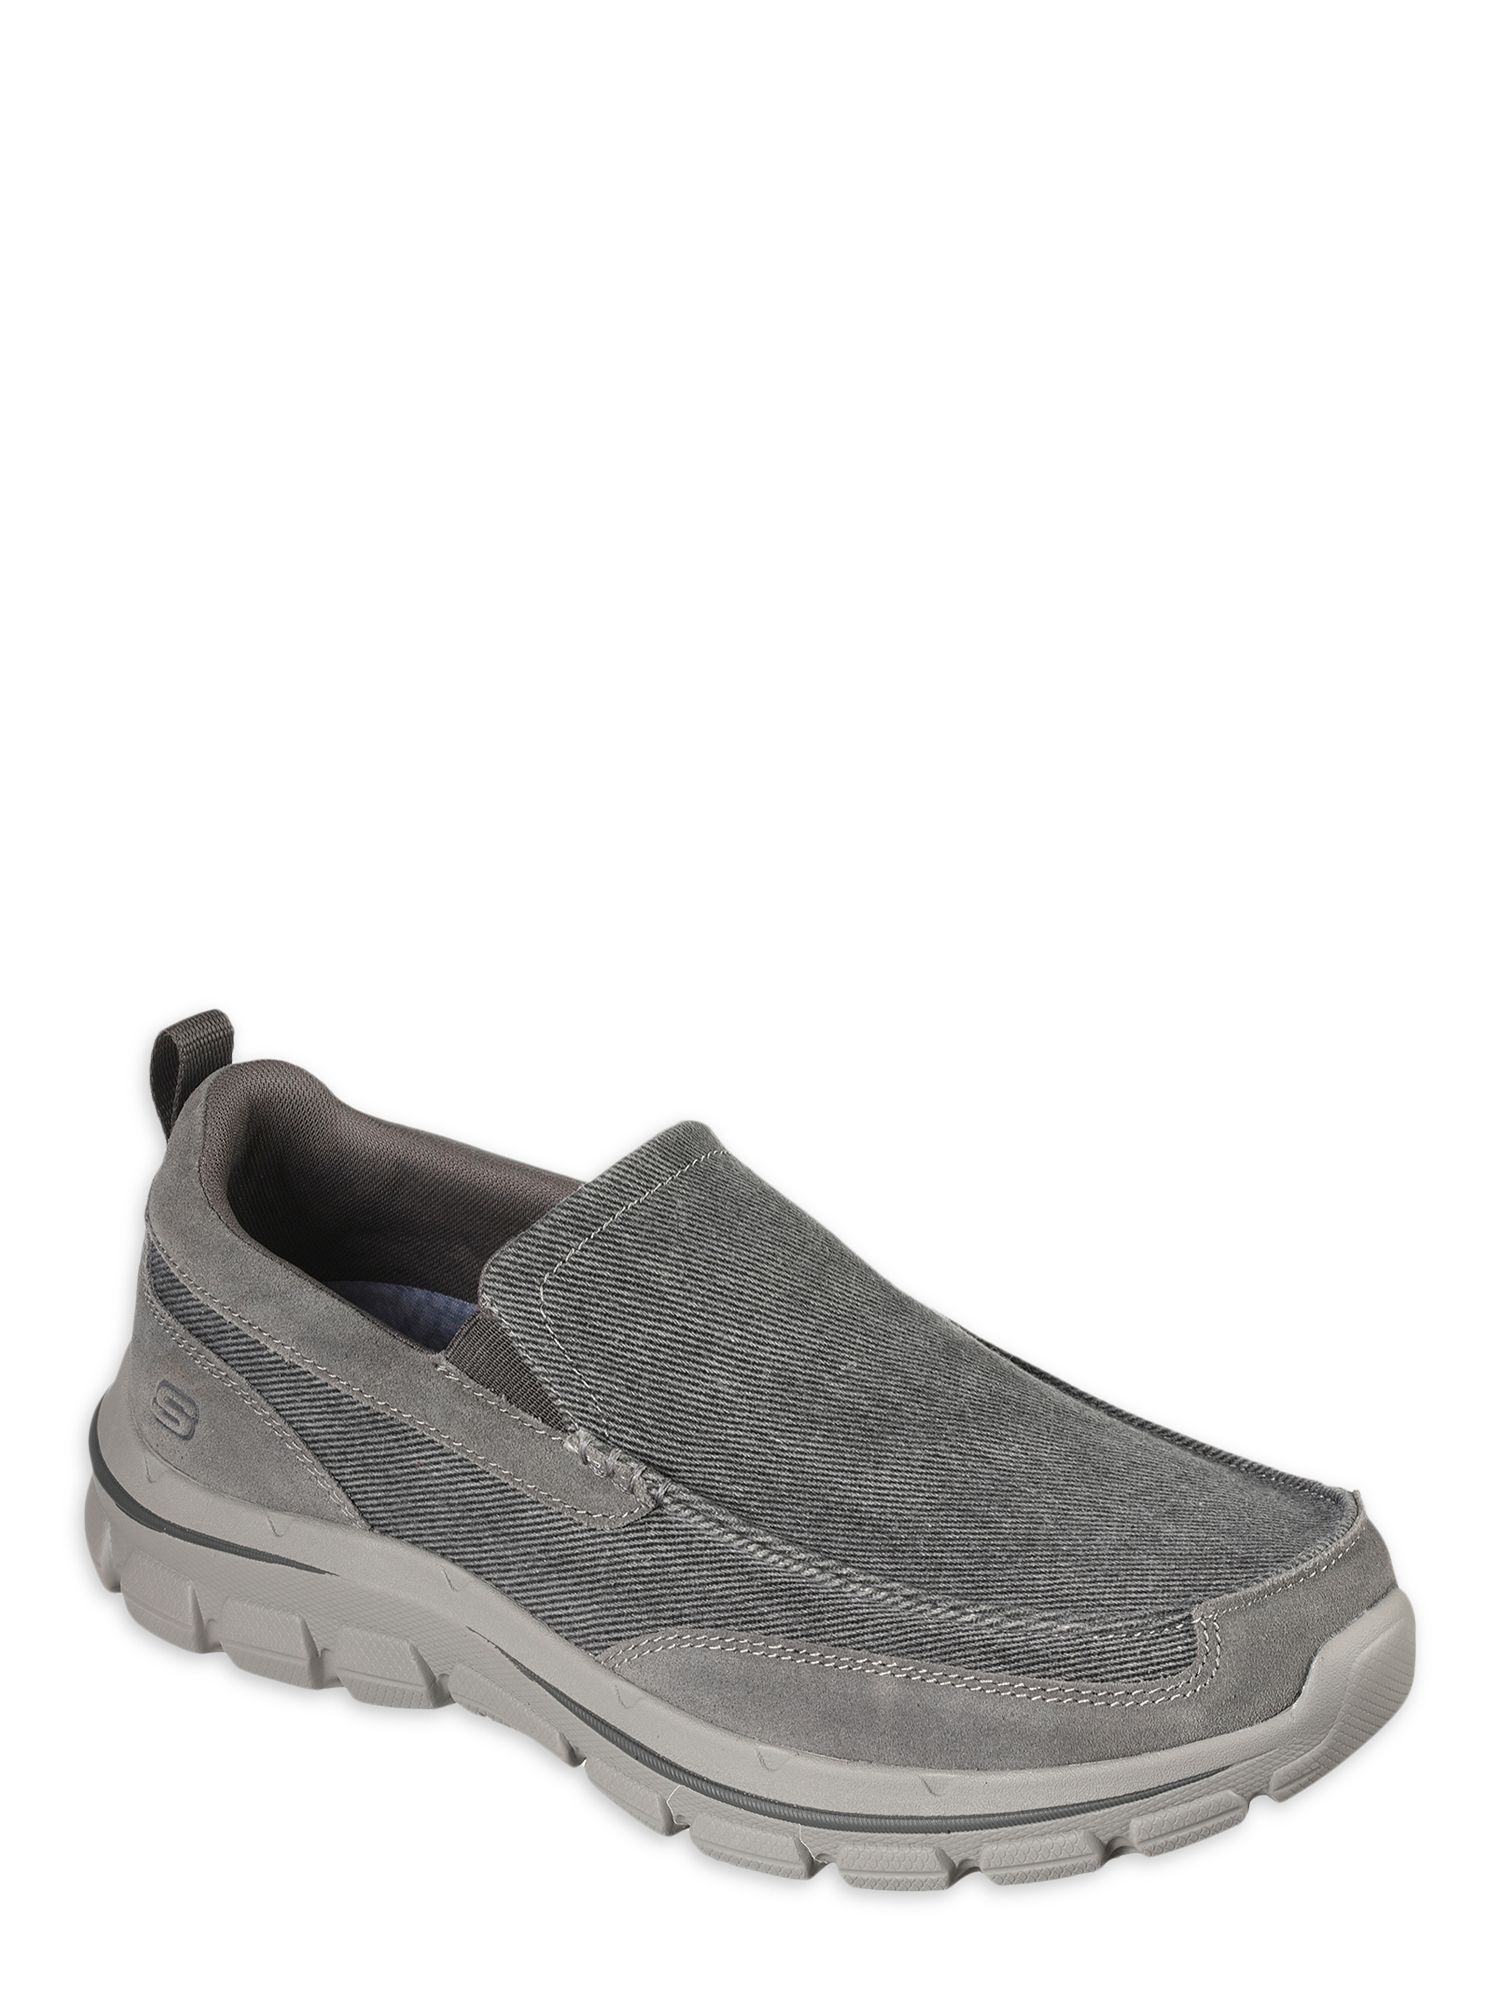 Skechers Relaxed Fit: PALMERO - MATTHIS (204391) / Moc Toe Loafer ...